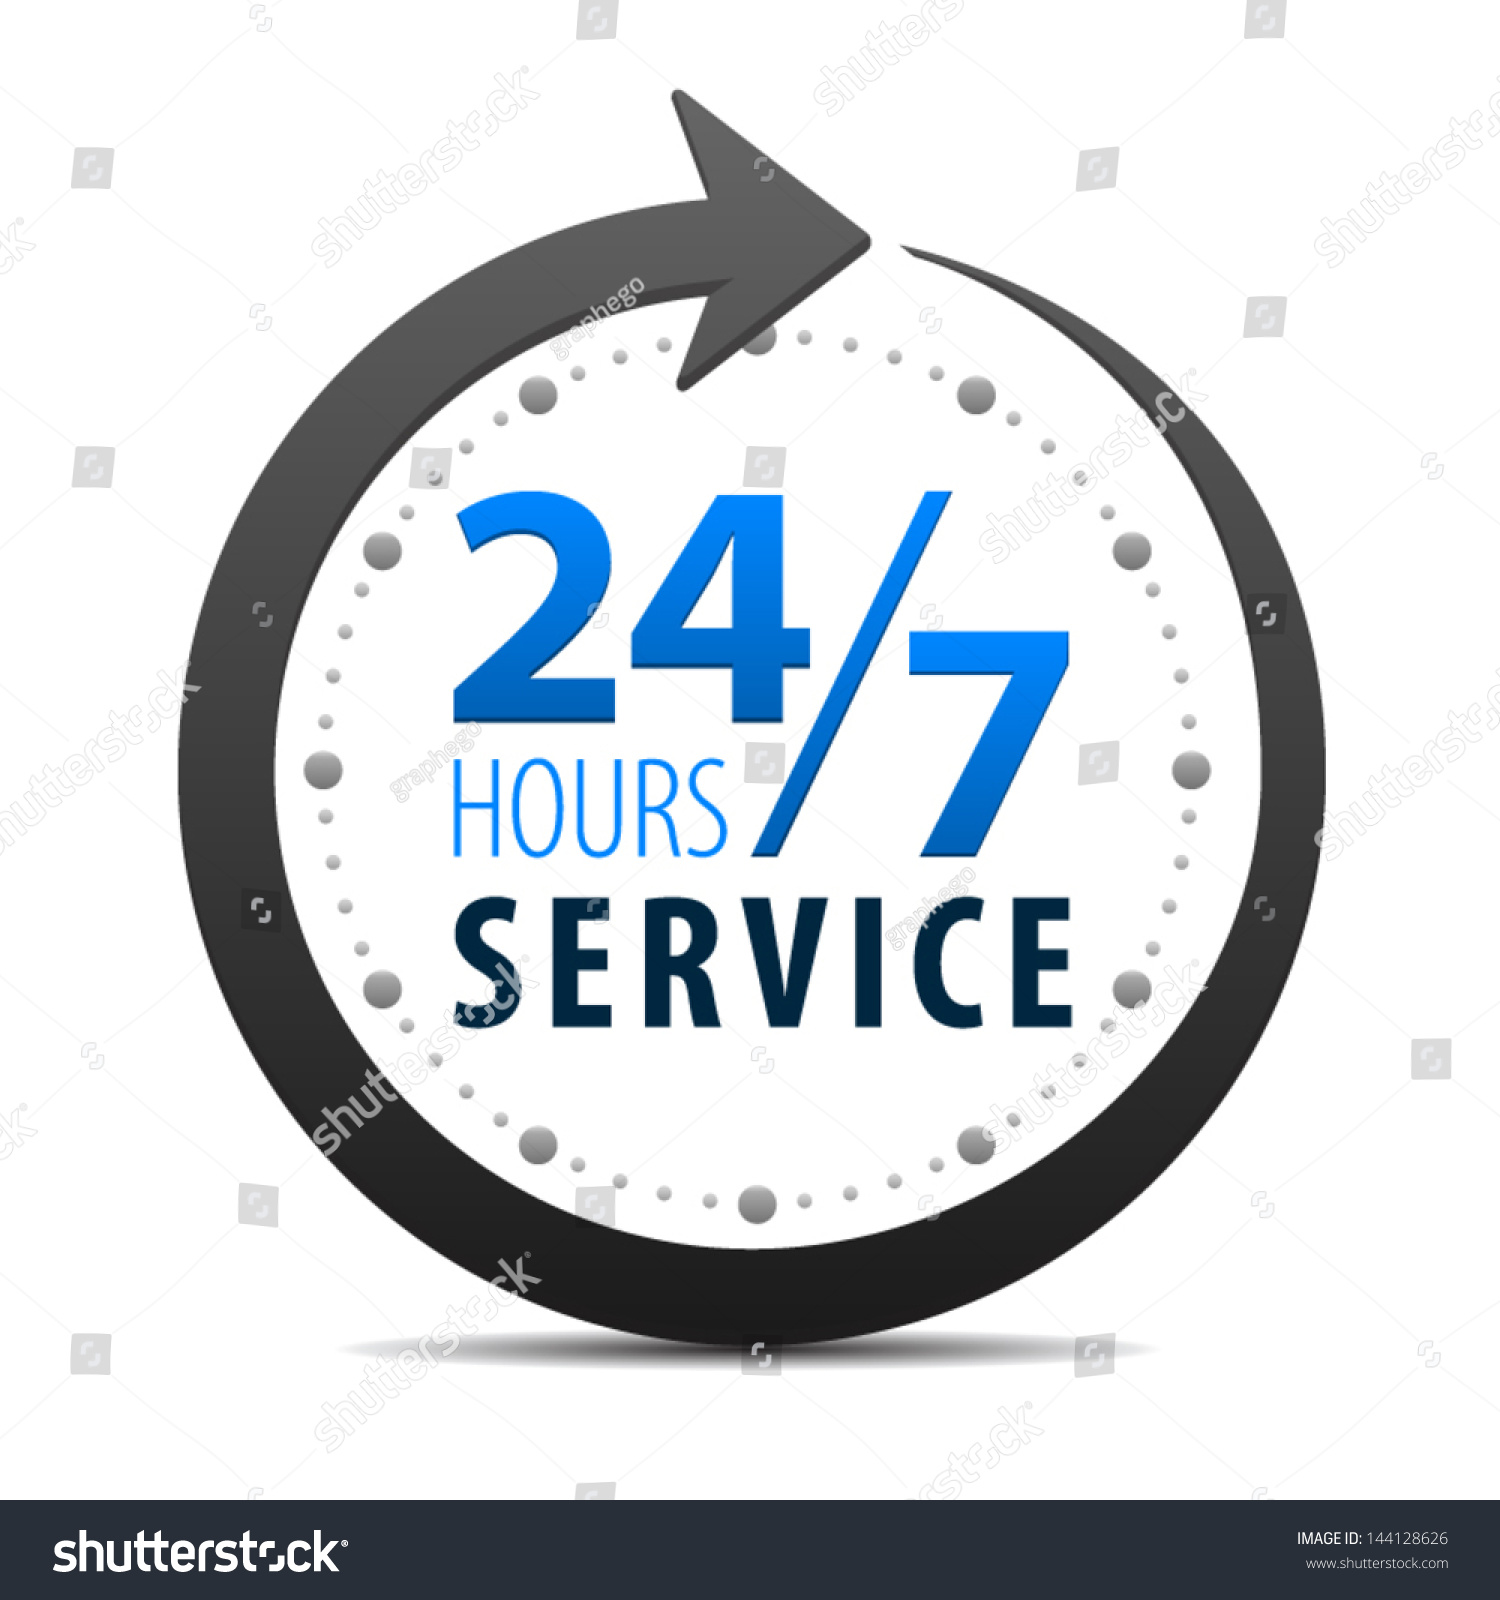 SVG of Service and support for customers around the clock and 24 hours a day and 7 days a week icon or symbol isolated on white background. Vector svg